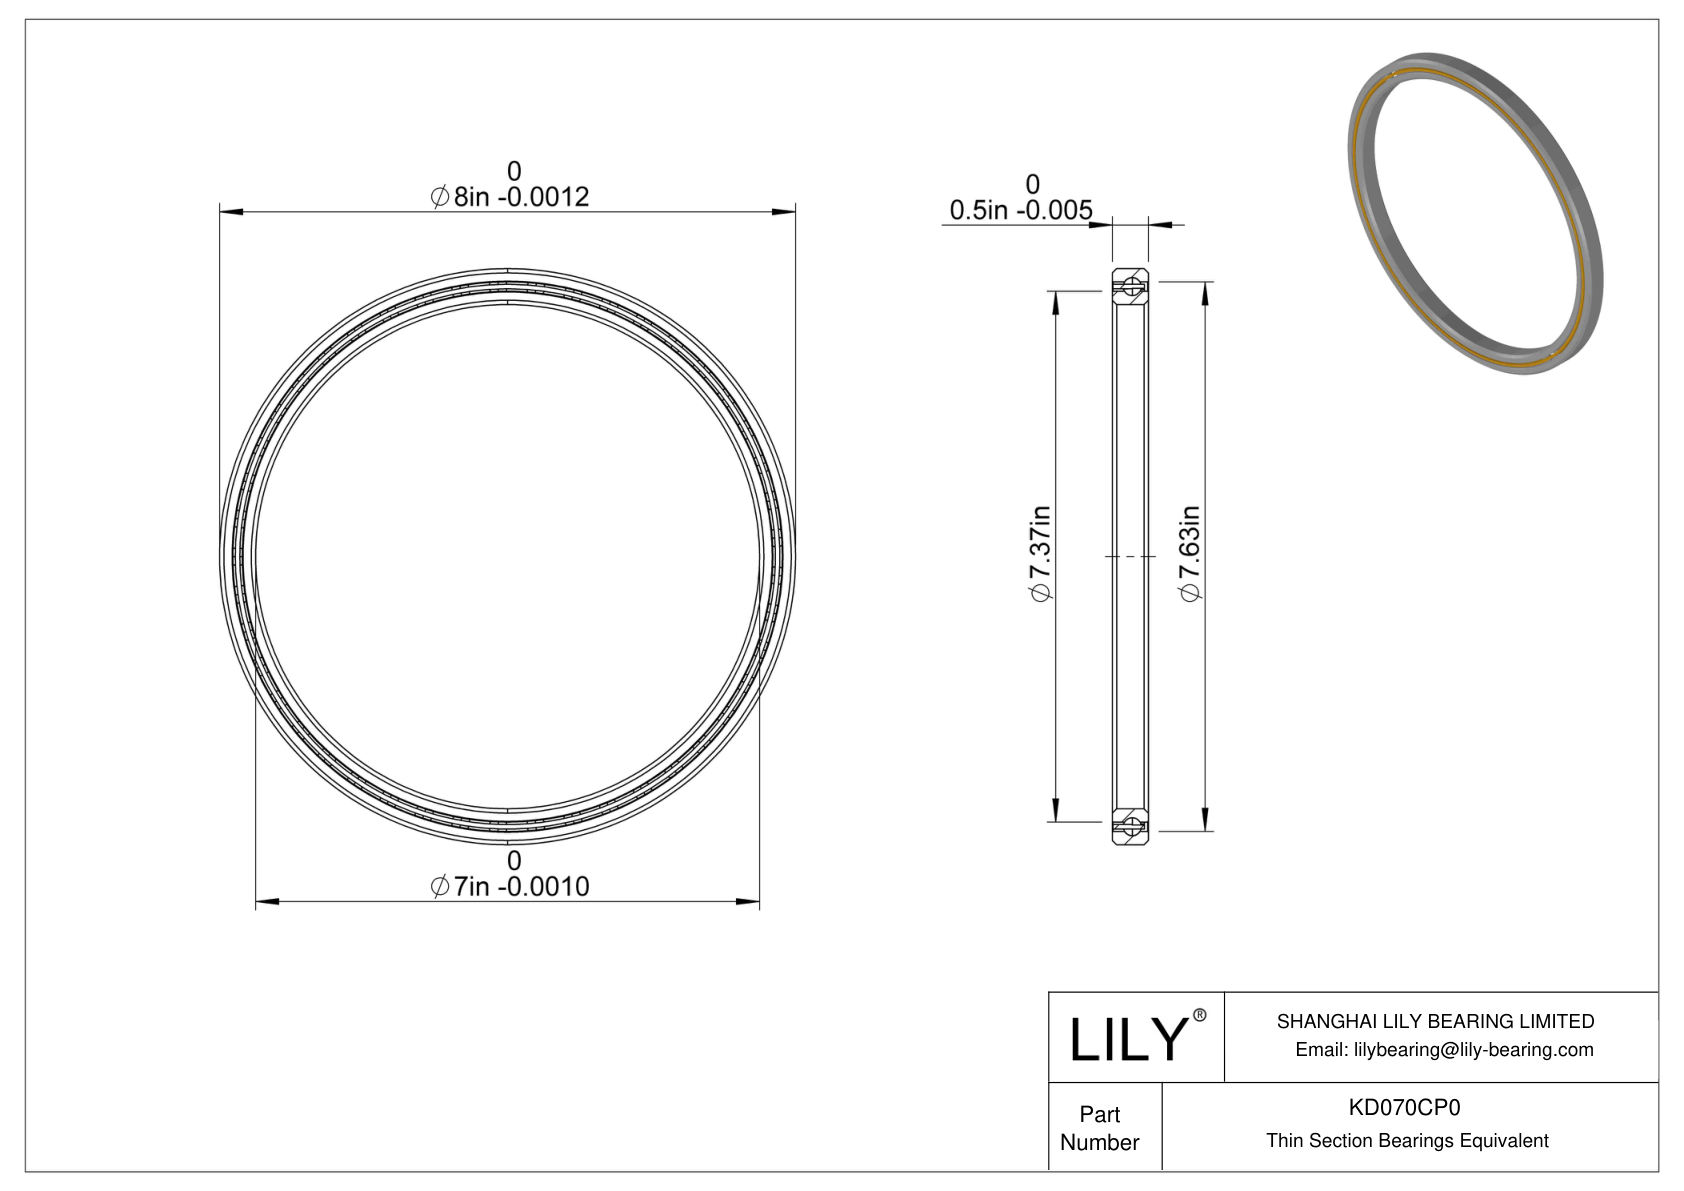 KD070CP0 Constant Section (CS) Bearings cad drawing